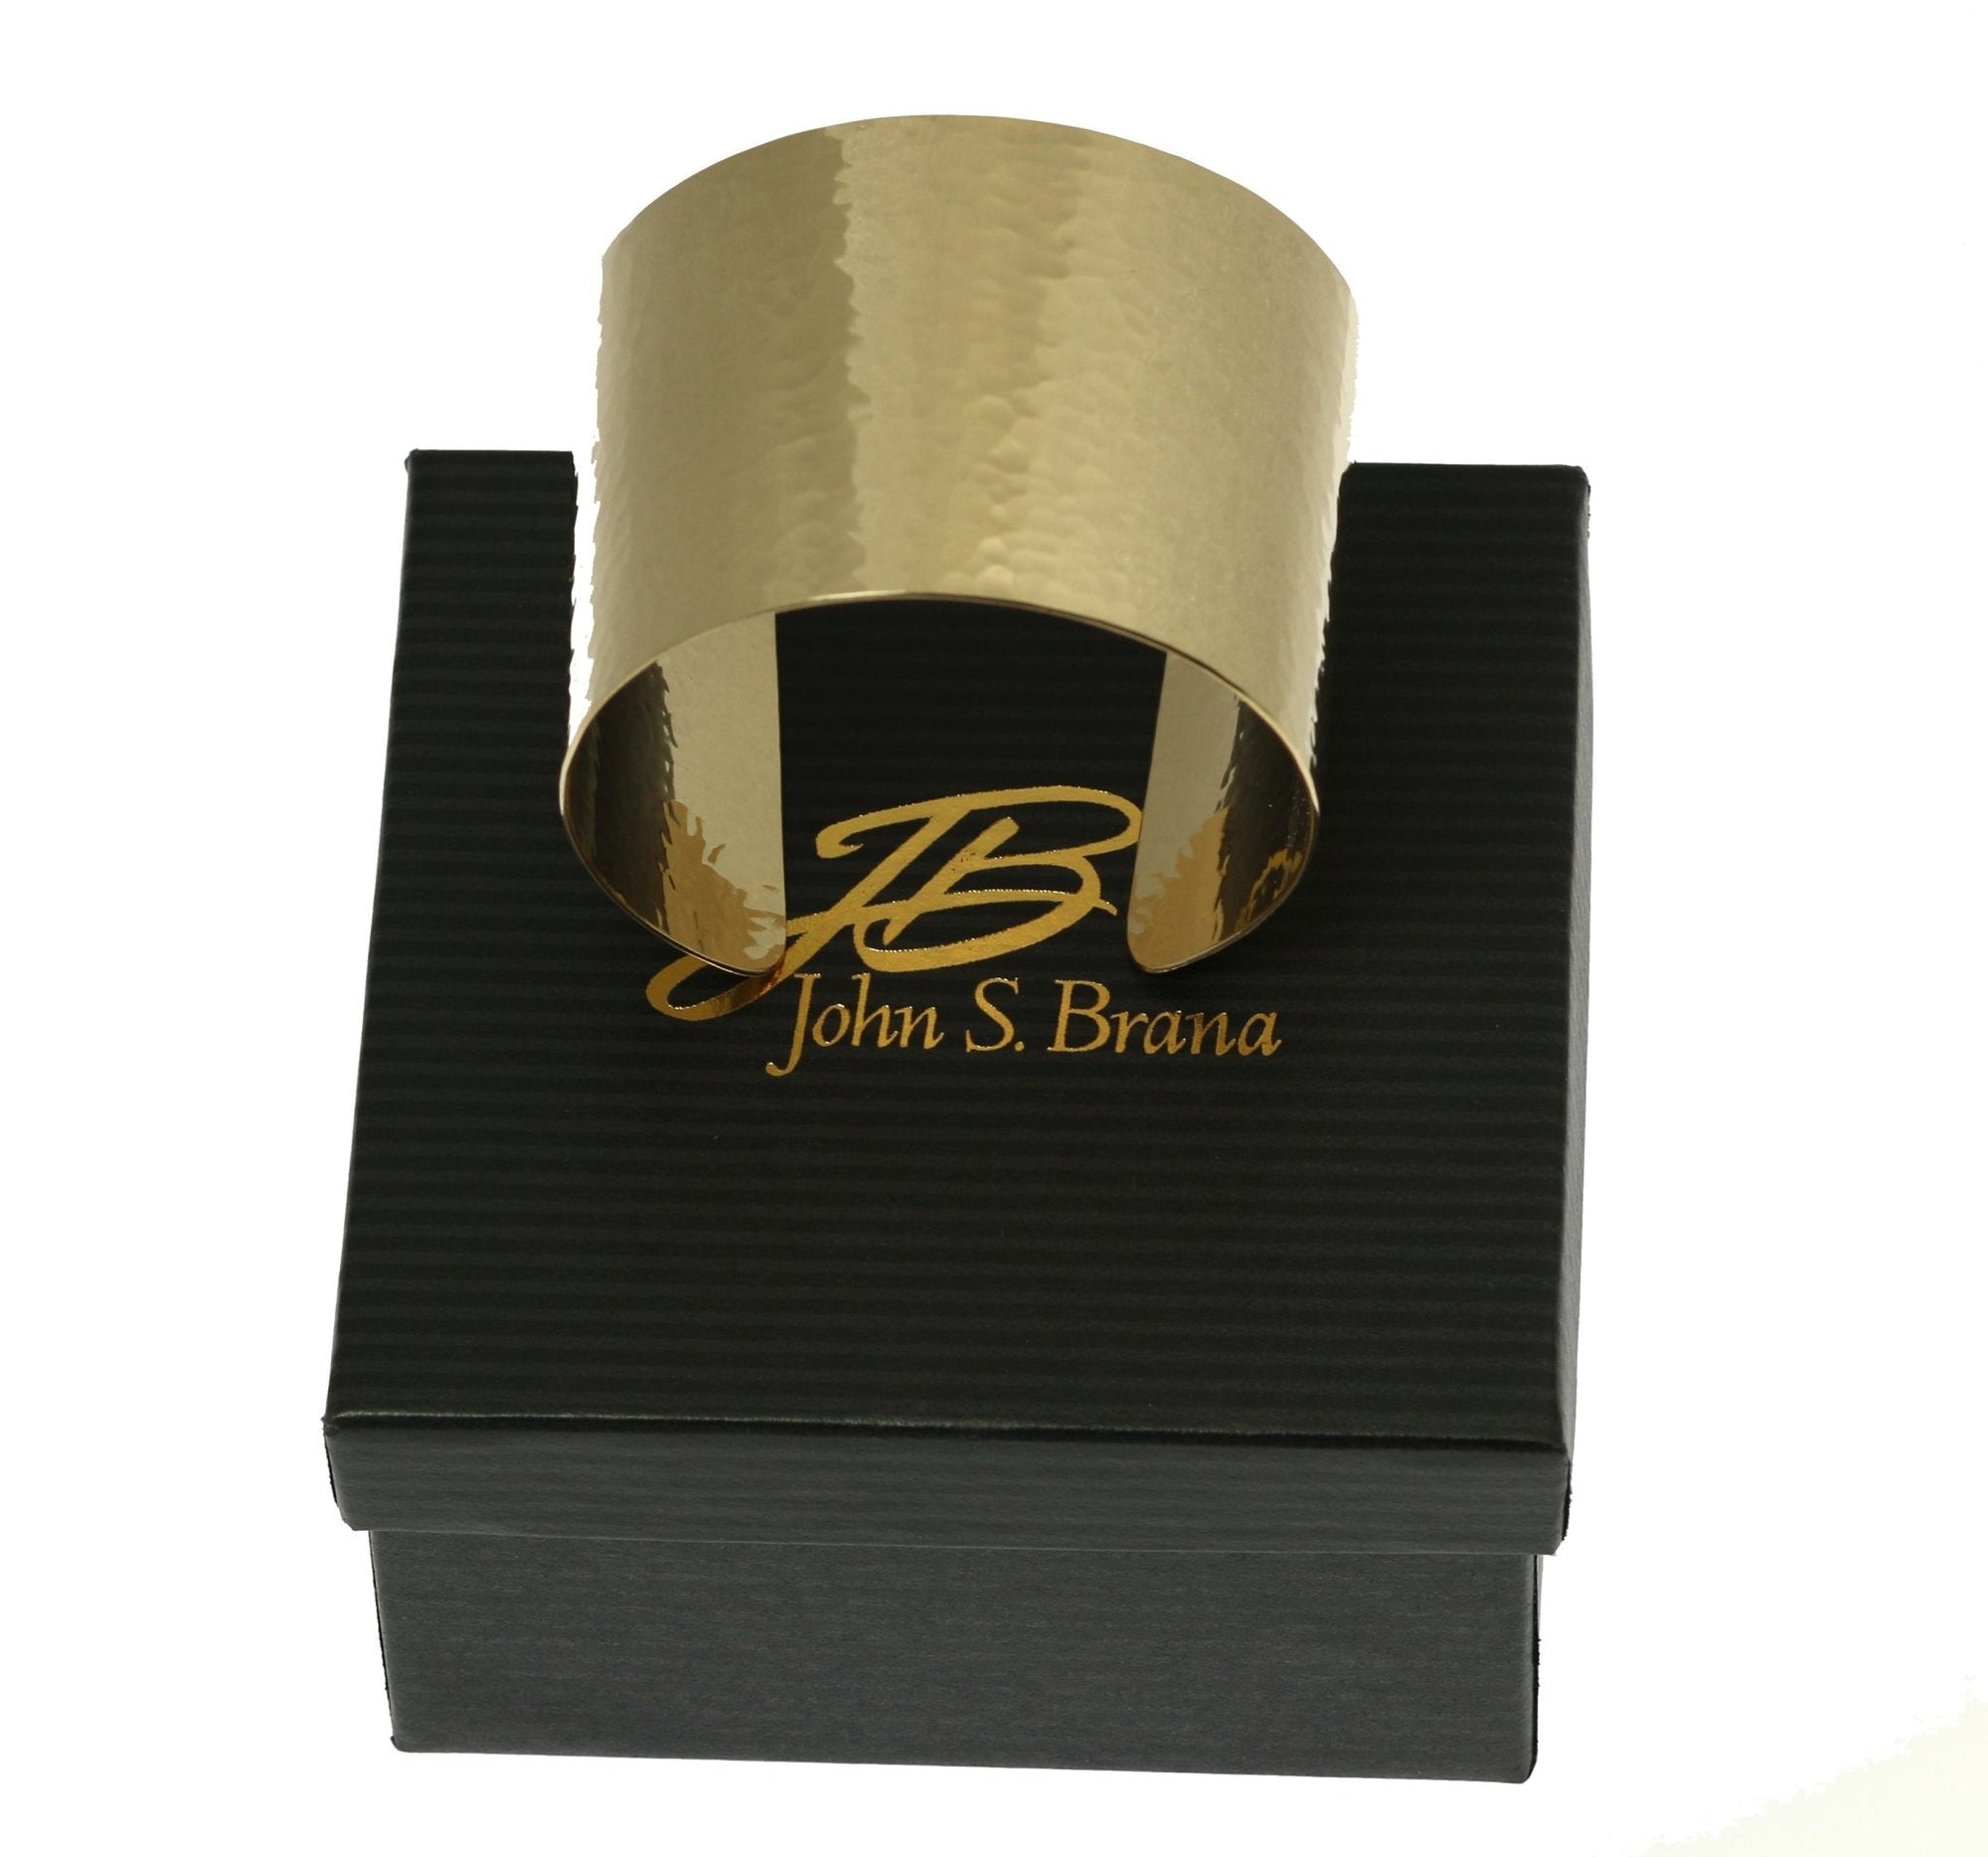 Hammered 14K Gold-filled Cuff Bracelet on top of Gift Box